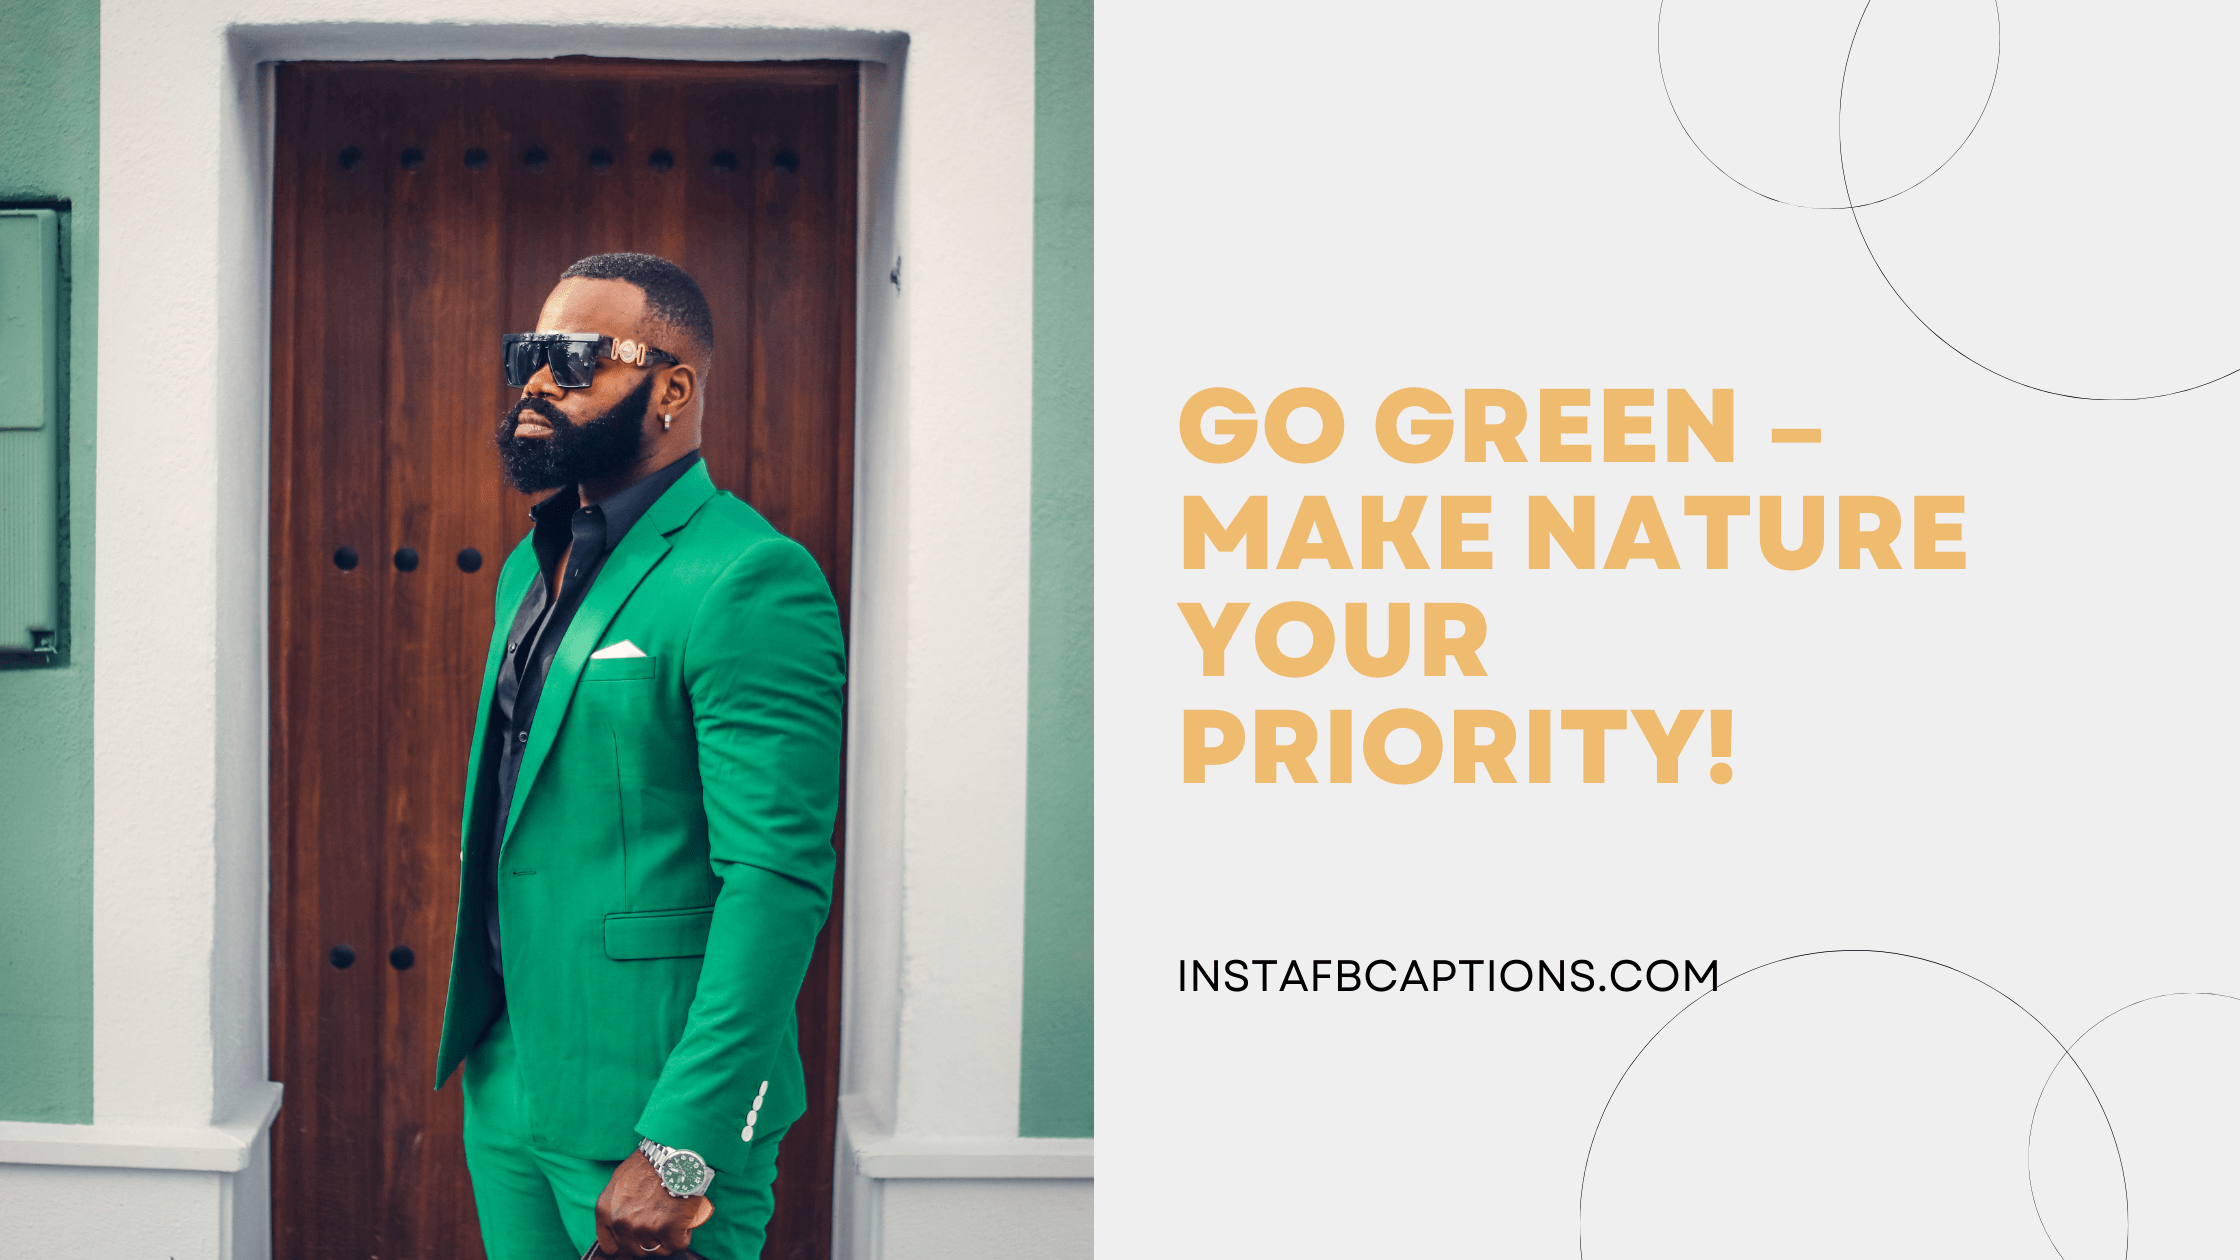 Aesthetic Captions For Designer Green Suit  - Aesthetic Captions for Designer Green Suit 1 - 89 Green Dress Instagram Captions and Quotes in 2022